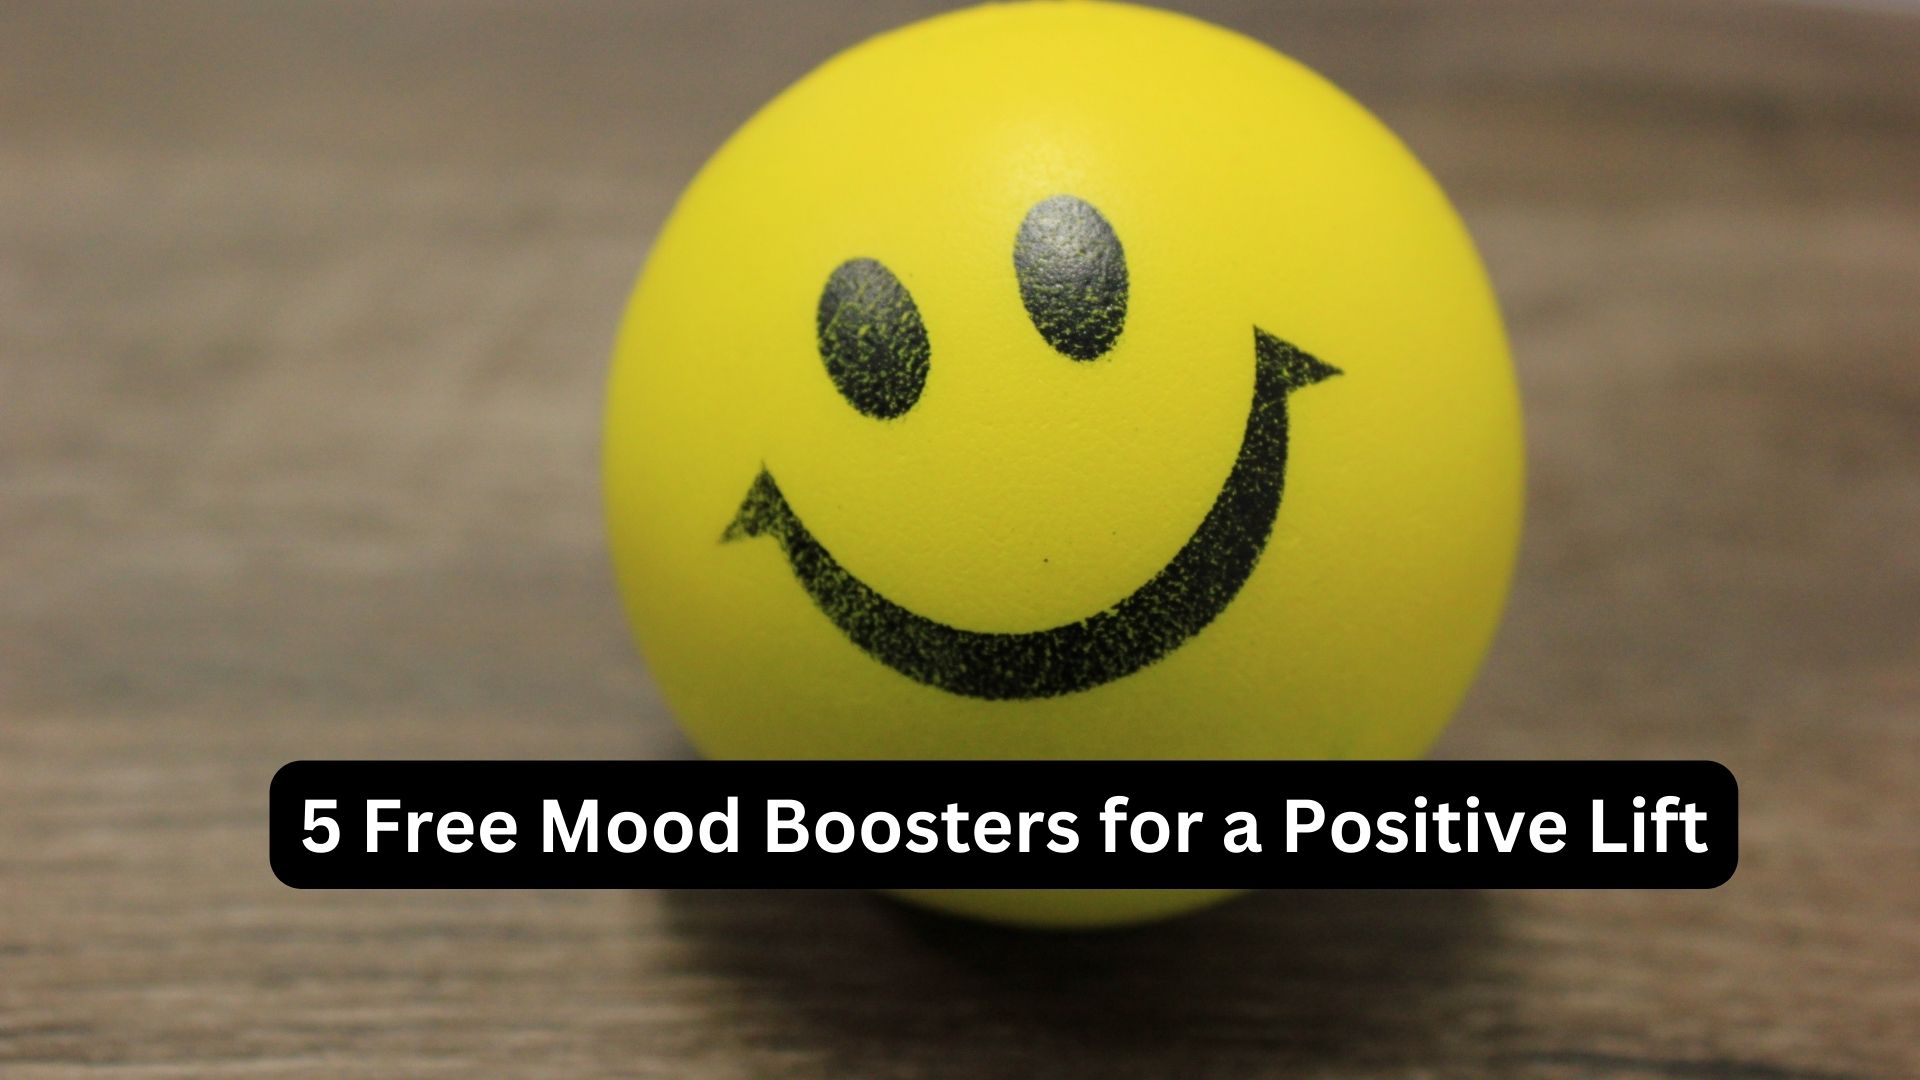 5 Free Mood Boosters for a Positive Lift